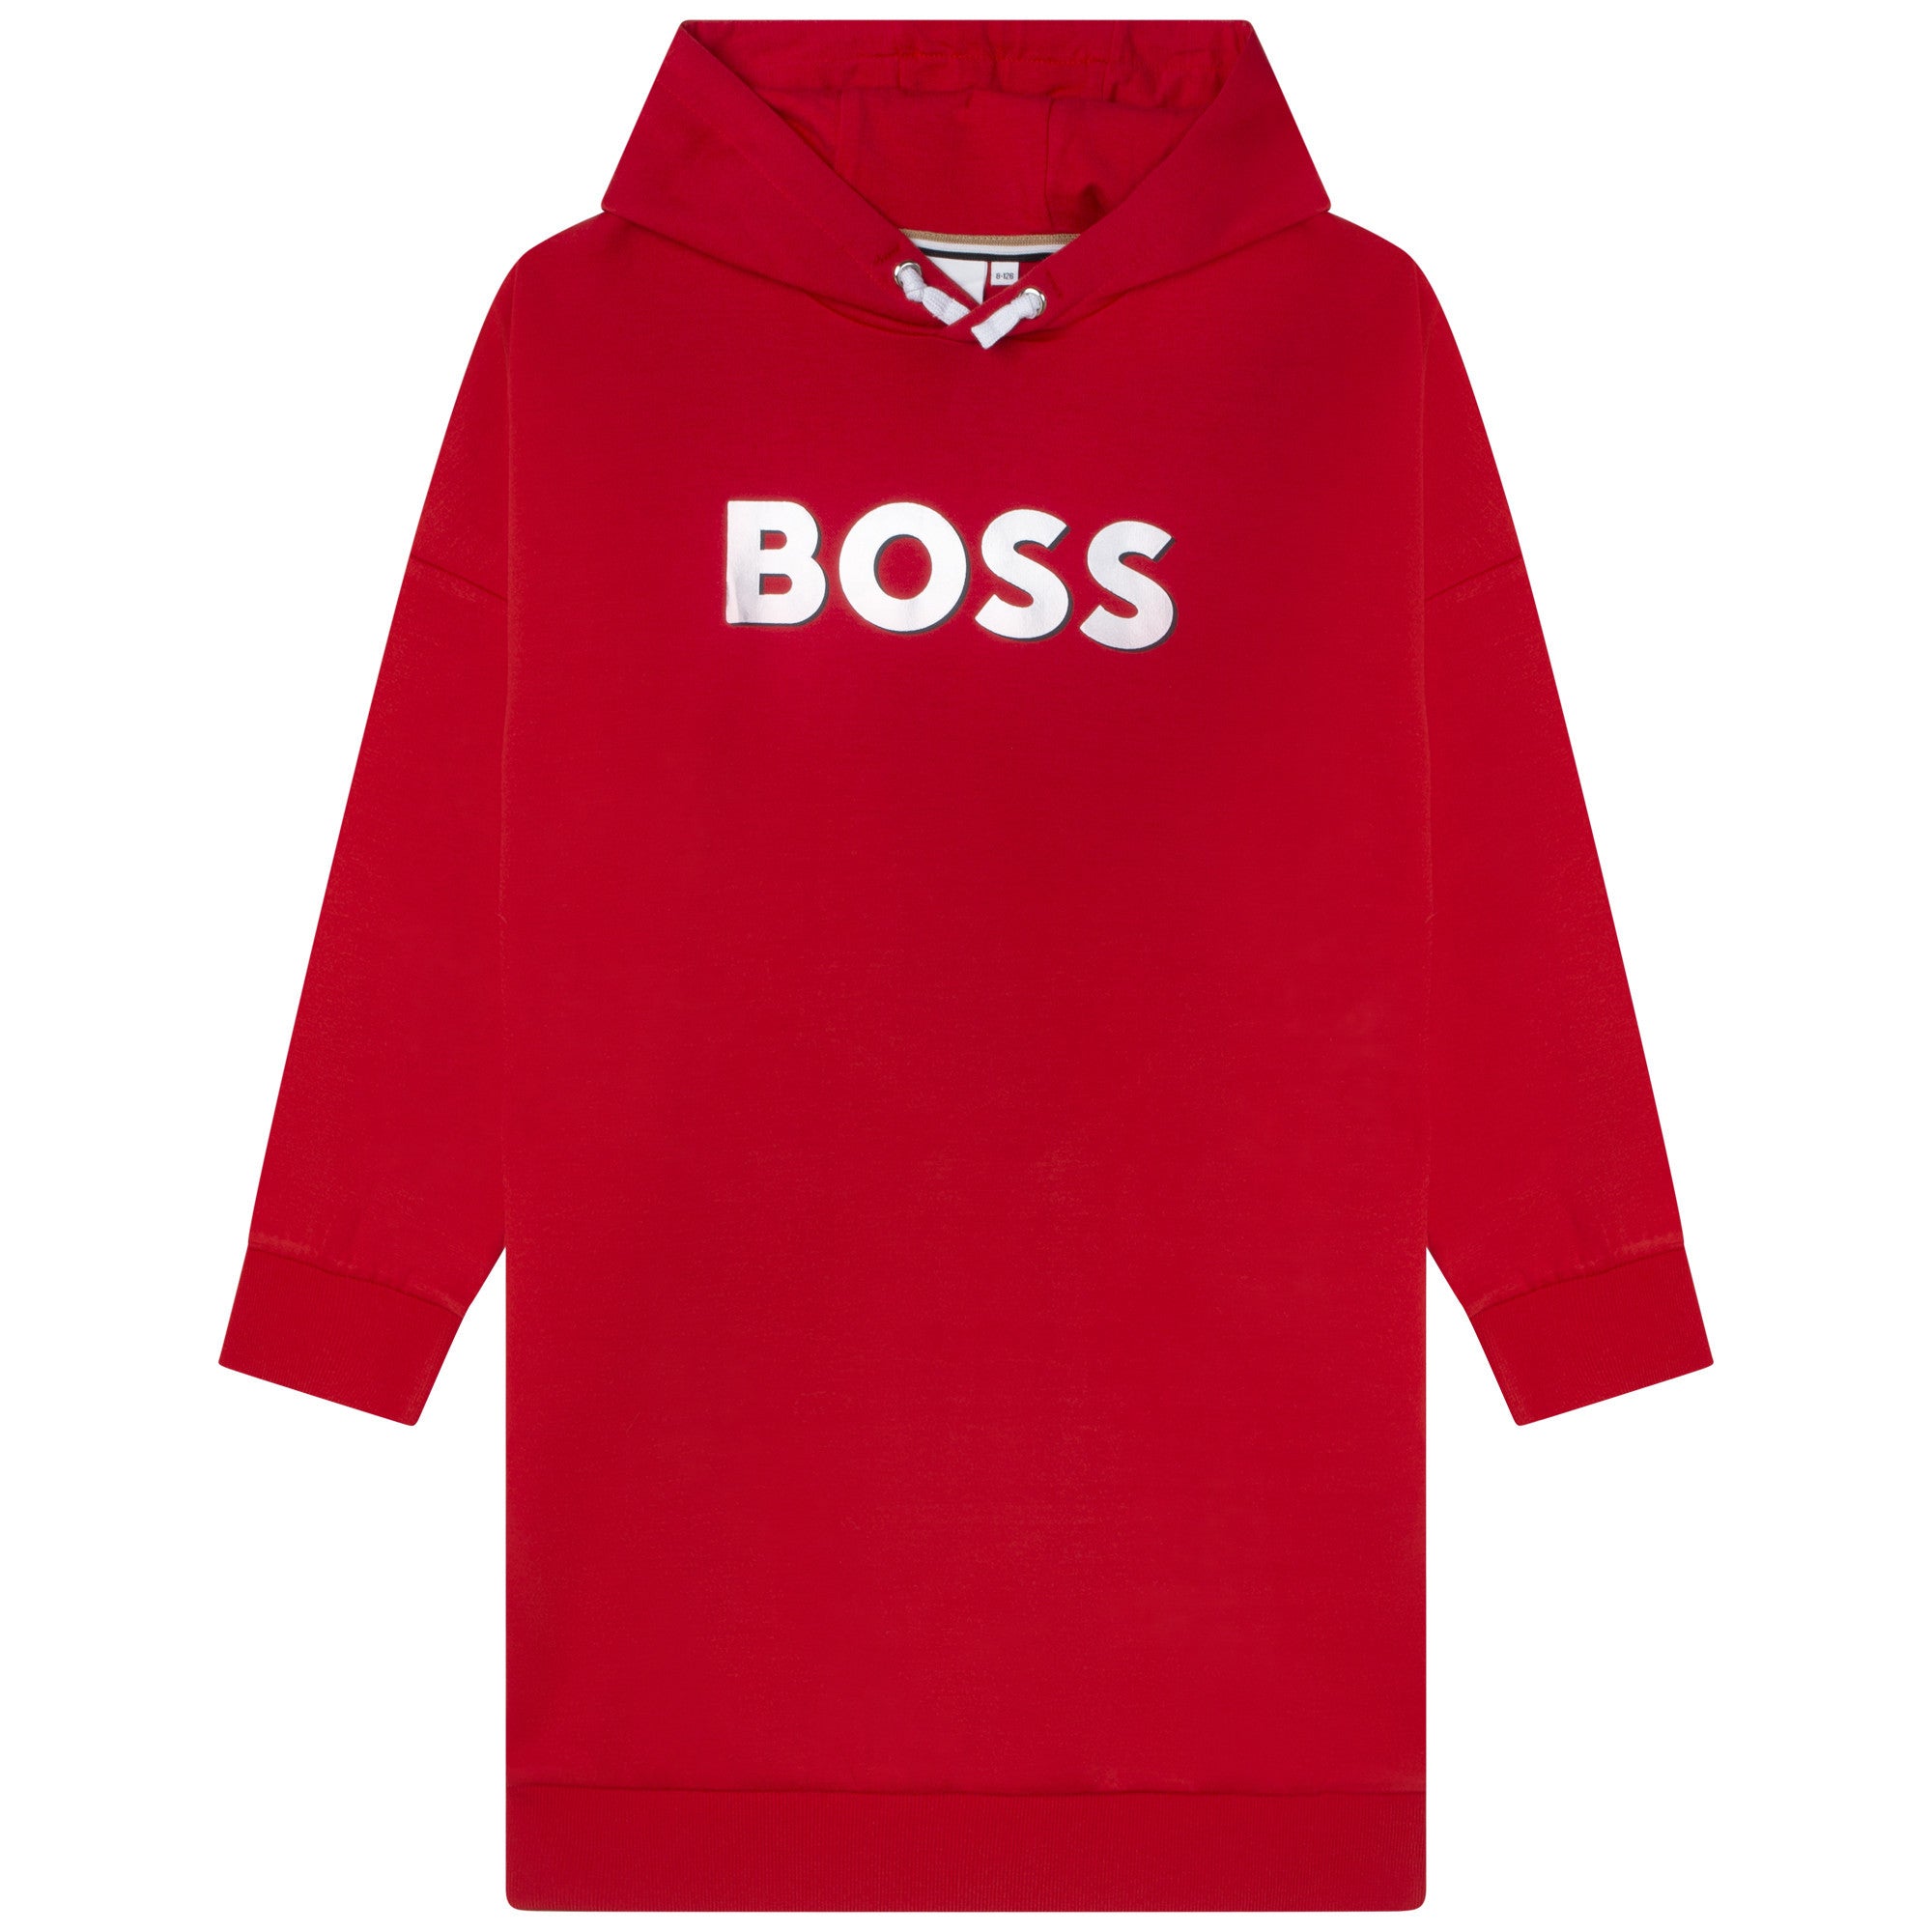 Casual red hoodie dress for girls, relaxed fit with Boss silver logo on the front